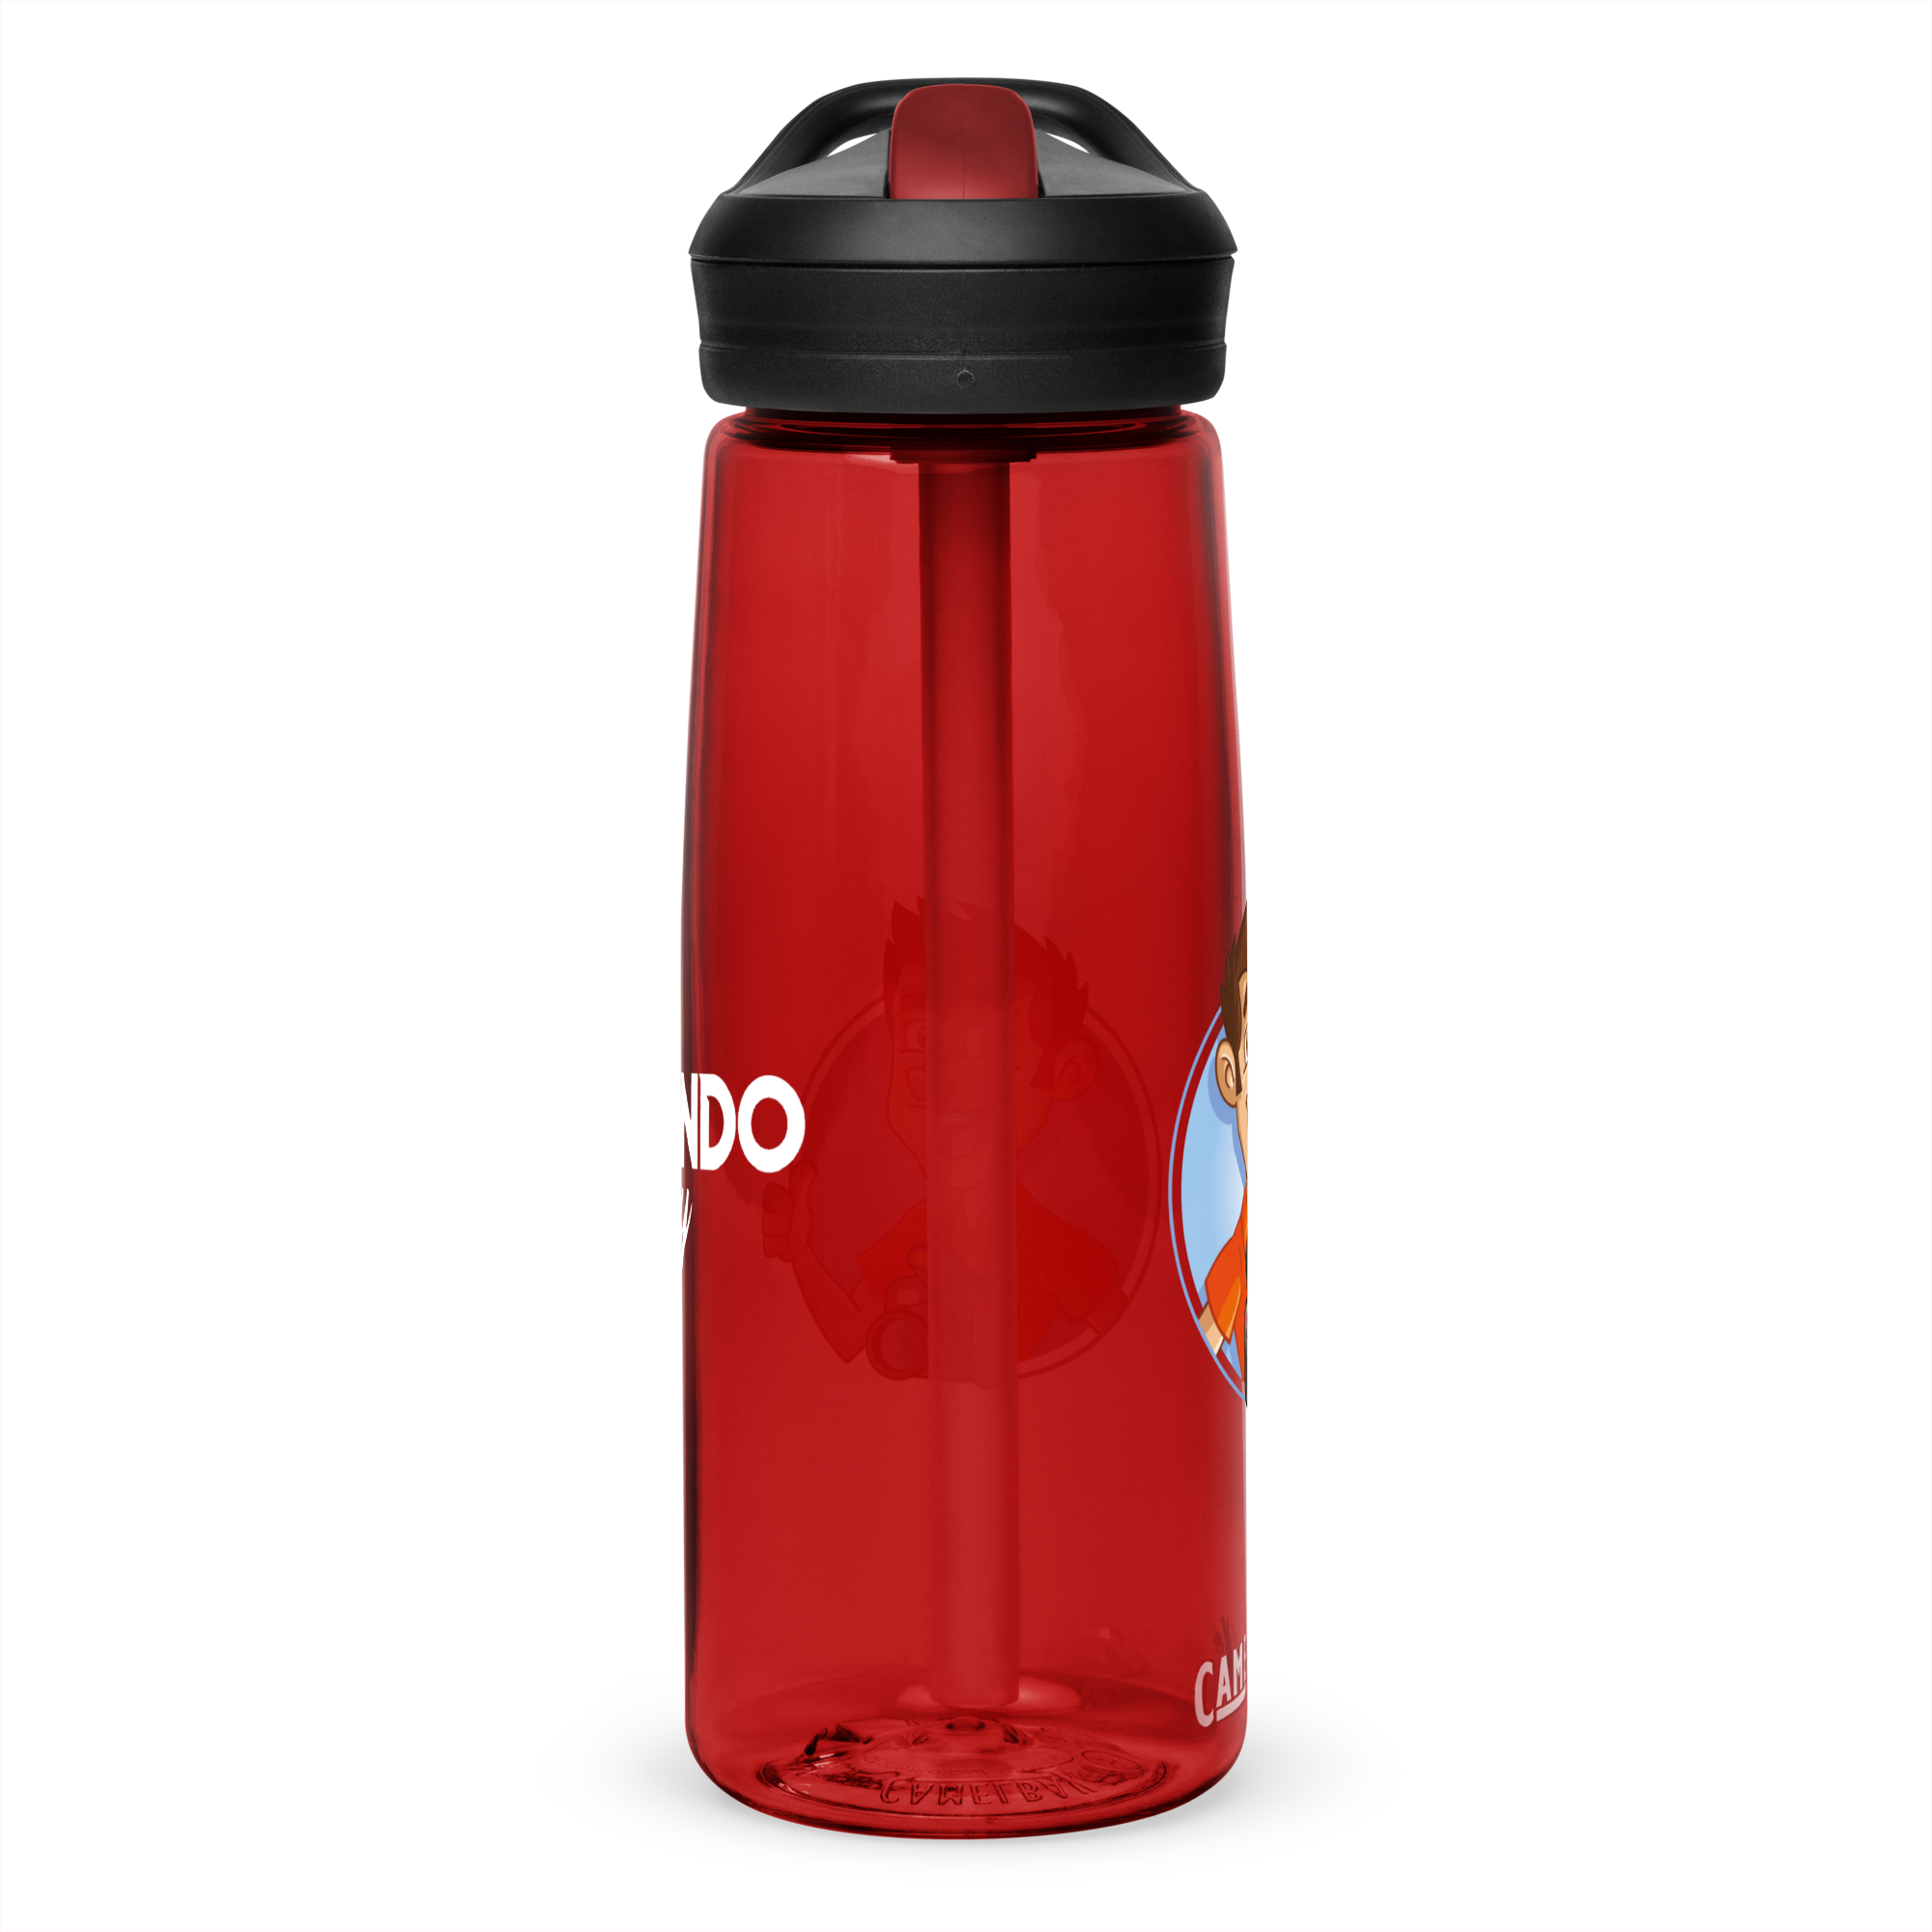 https://www.theorlandoguy.com/wp-content/uploads/2023/08/sports-water-bottle-cardinal-right-64cfe1fa37055.png